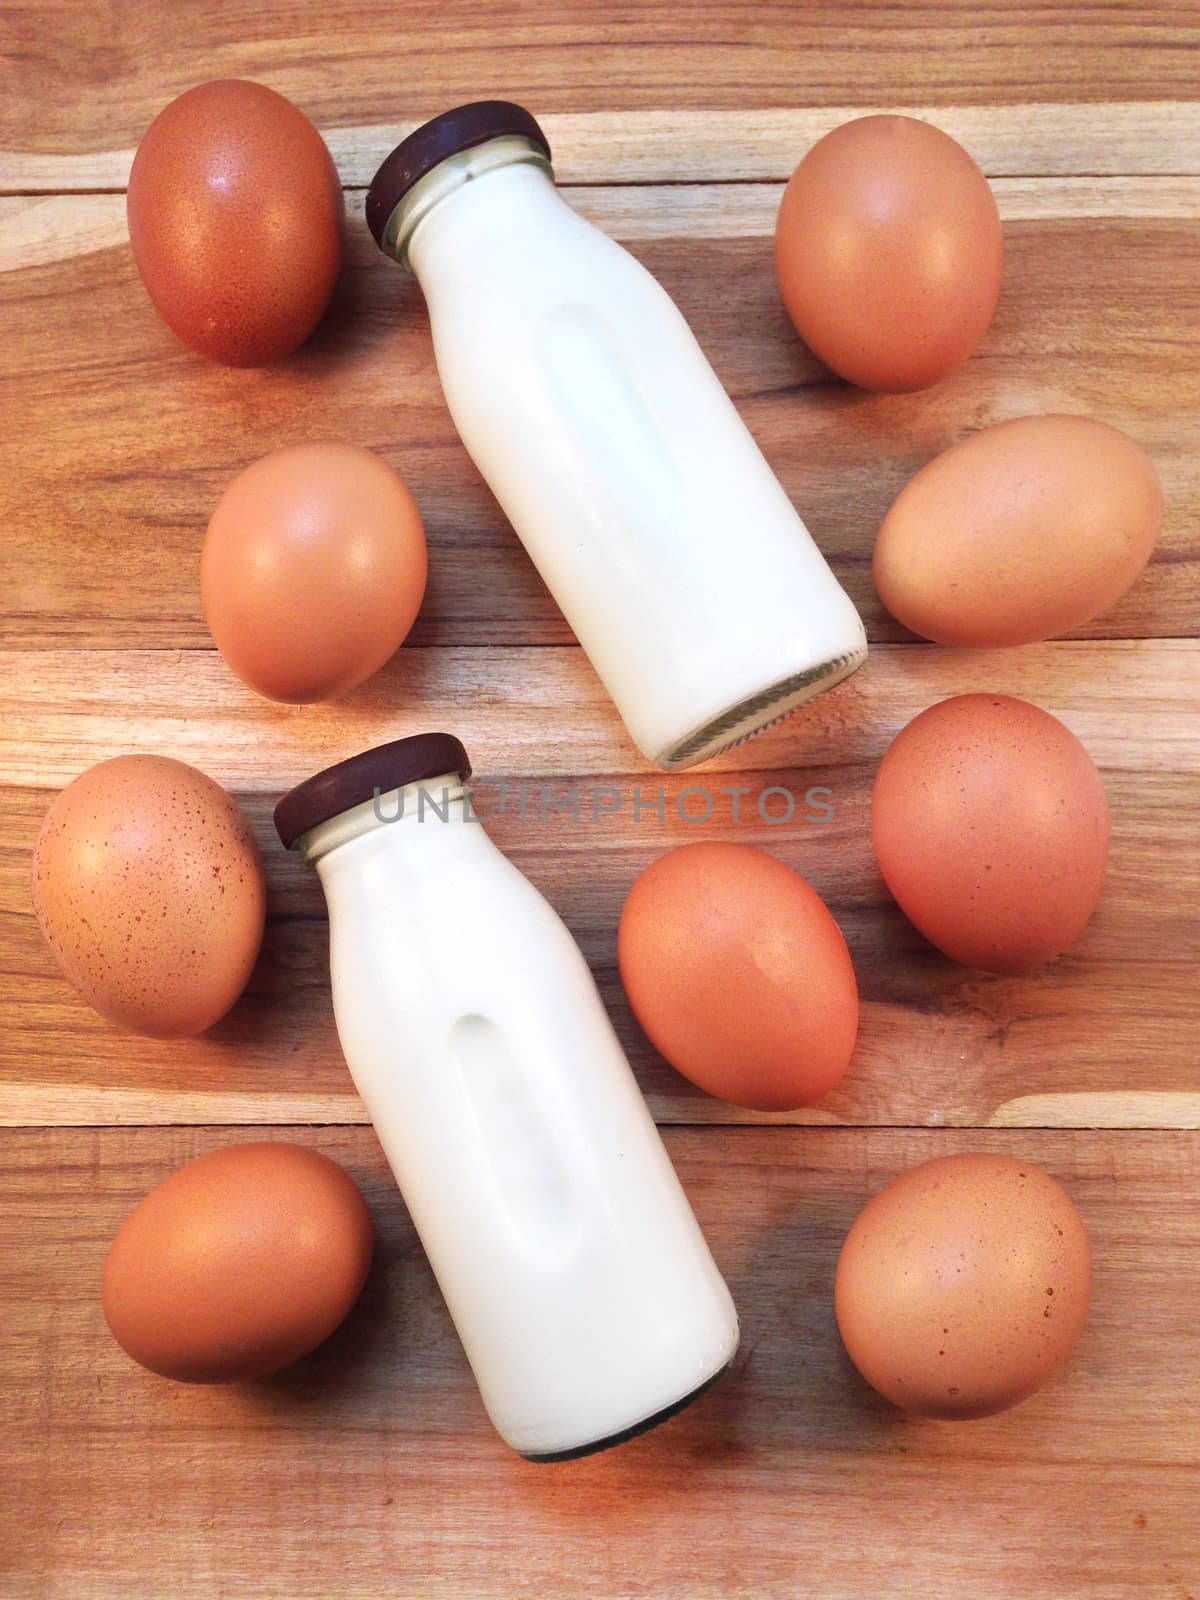 Eggs with bottle of milk on wooden background